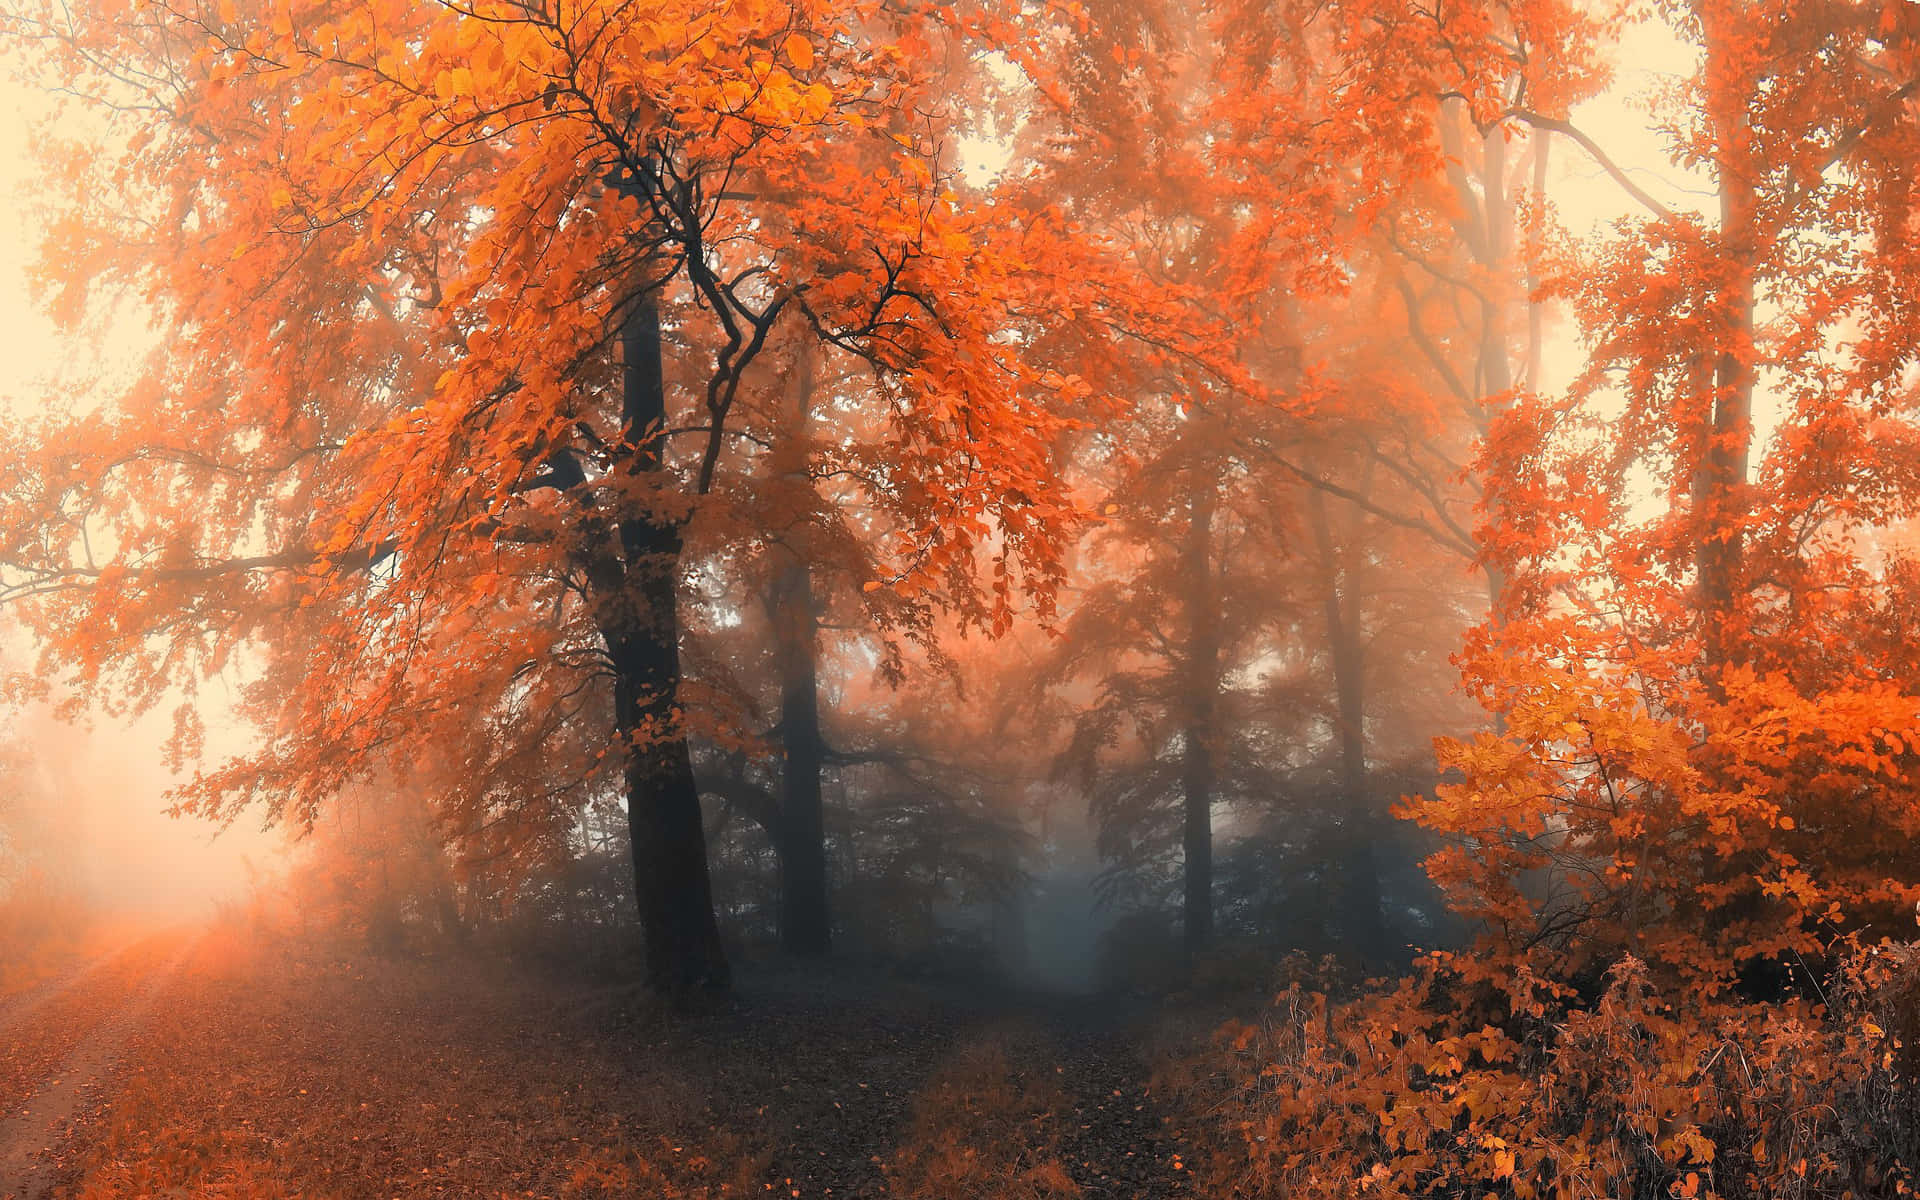 Feel the Coziness of Fall from Your Desktop Wallpaper